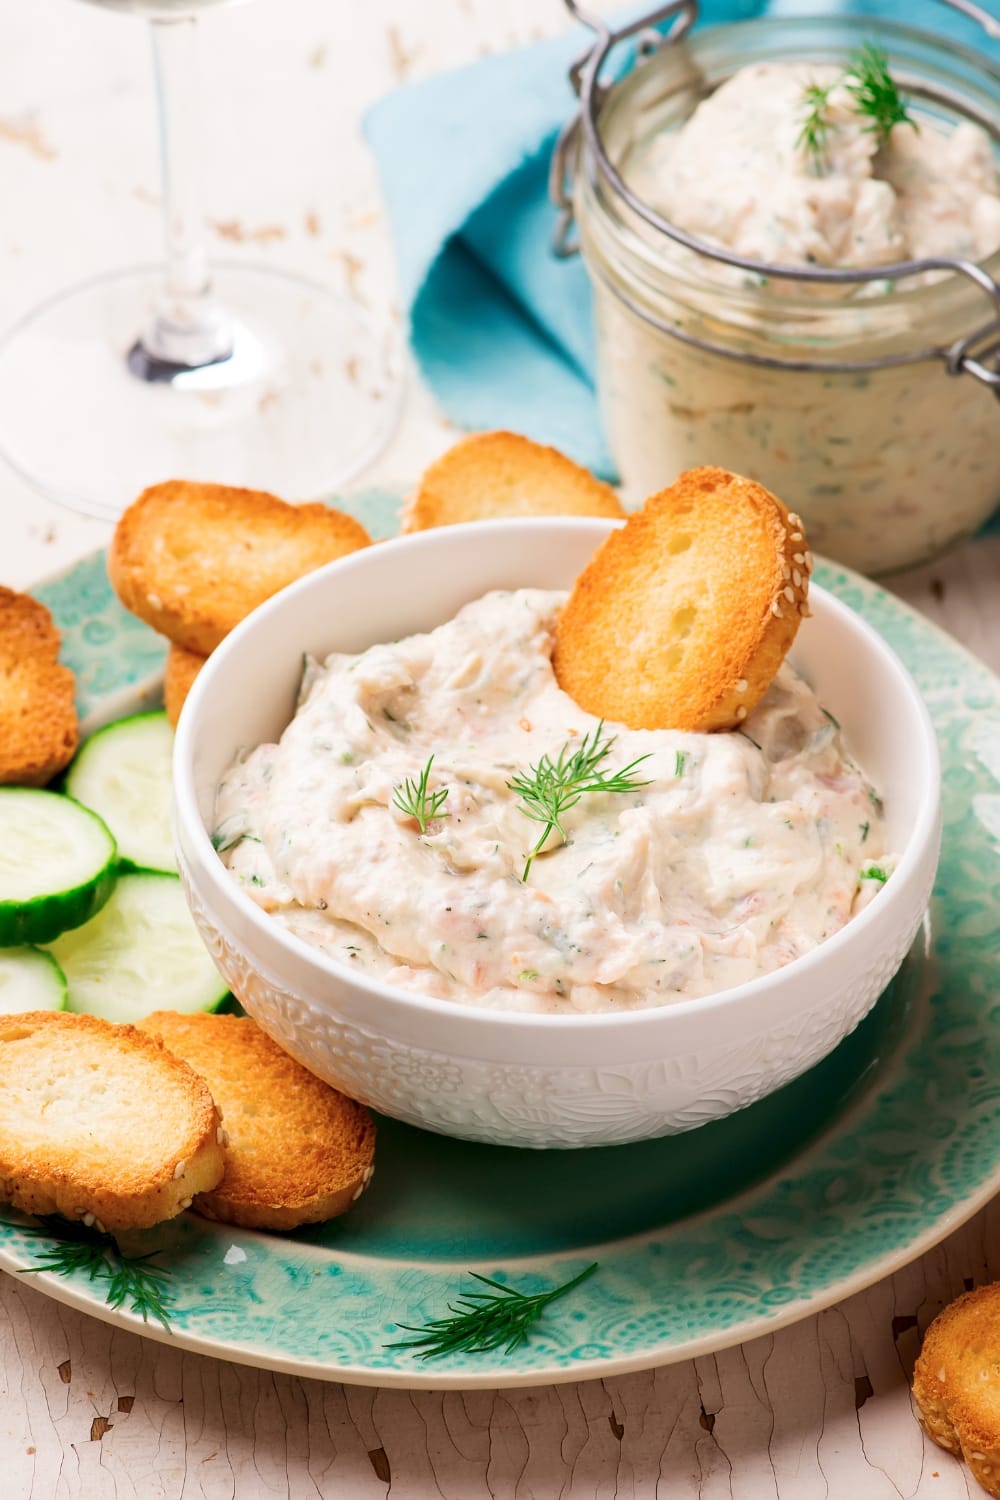 Biscuits and Cucumber Slices on a Plate served with a Bowl of Homemade Smoked Salmon Dip